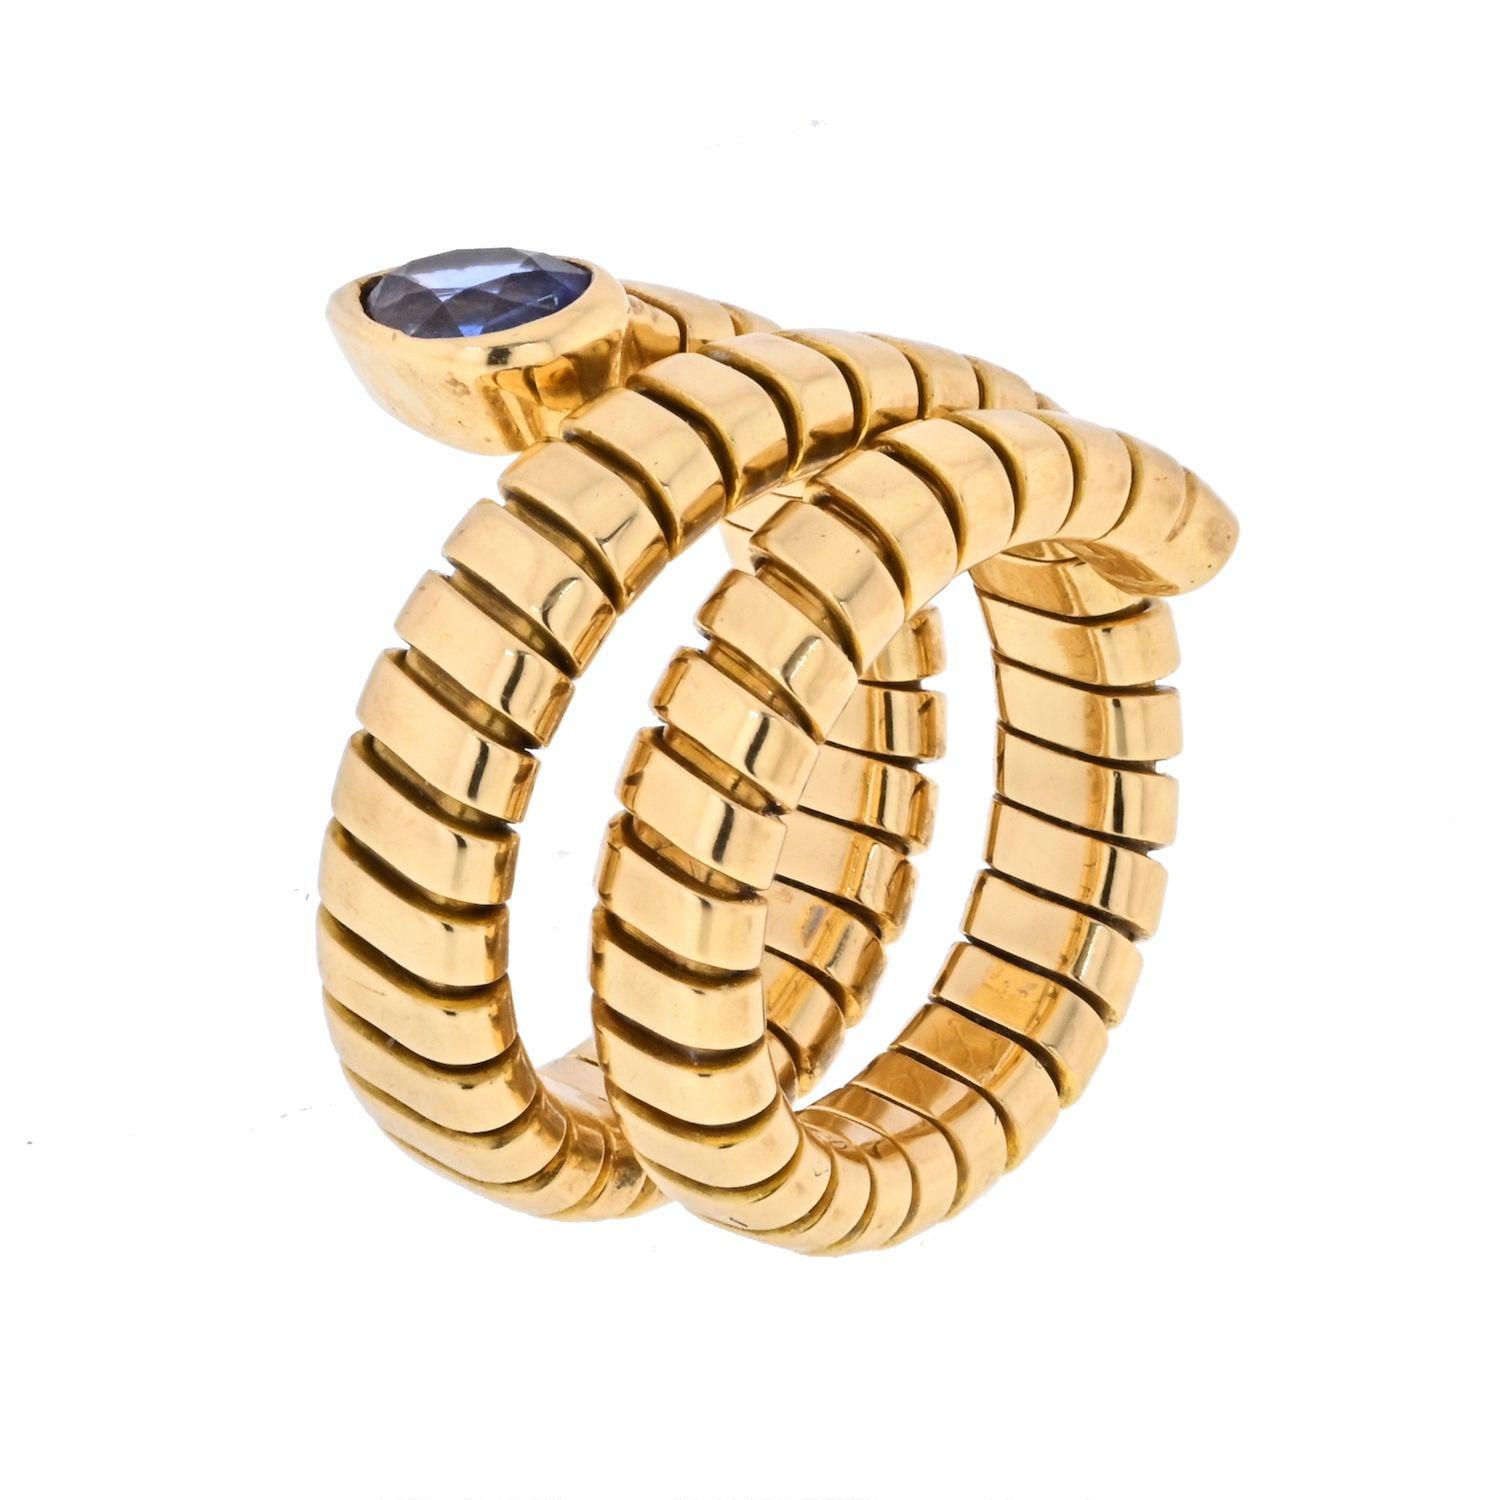 Lovely Bvlgari 18K Yellow Gold Tubogas ring with a blue sapphire ring.
A classic that will be your favorite in the jewelry box. Match it with your other tubogas items. 
Size 6.